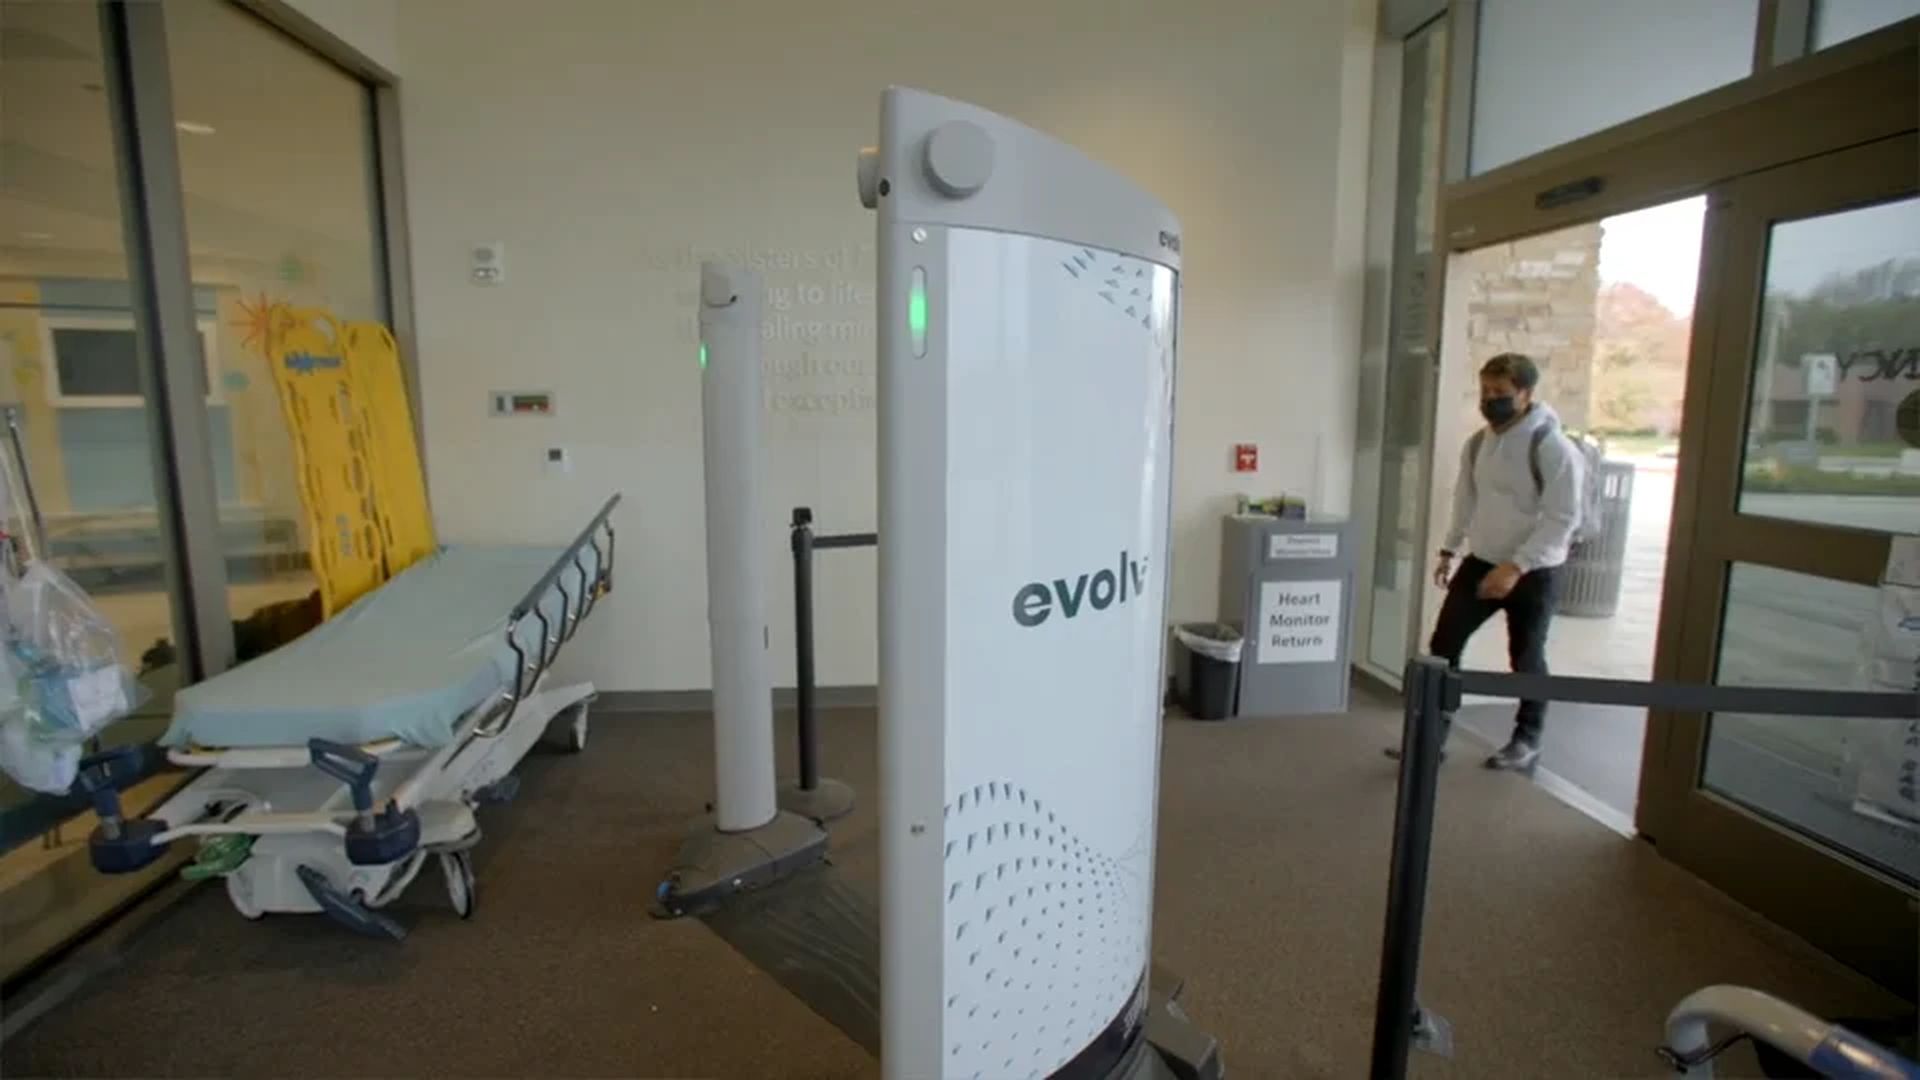 Evolv Withdraws Previous Claims on Testing AI Weapons Scanners in the UK